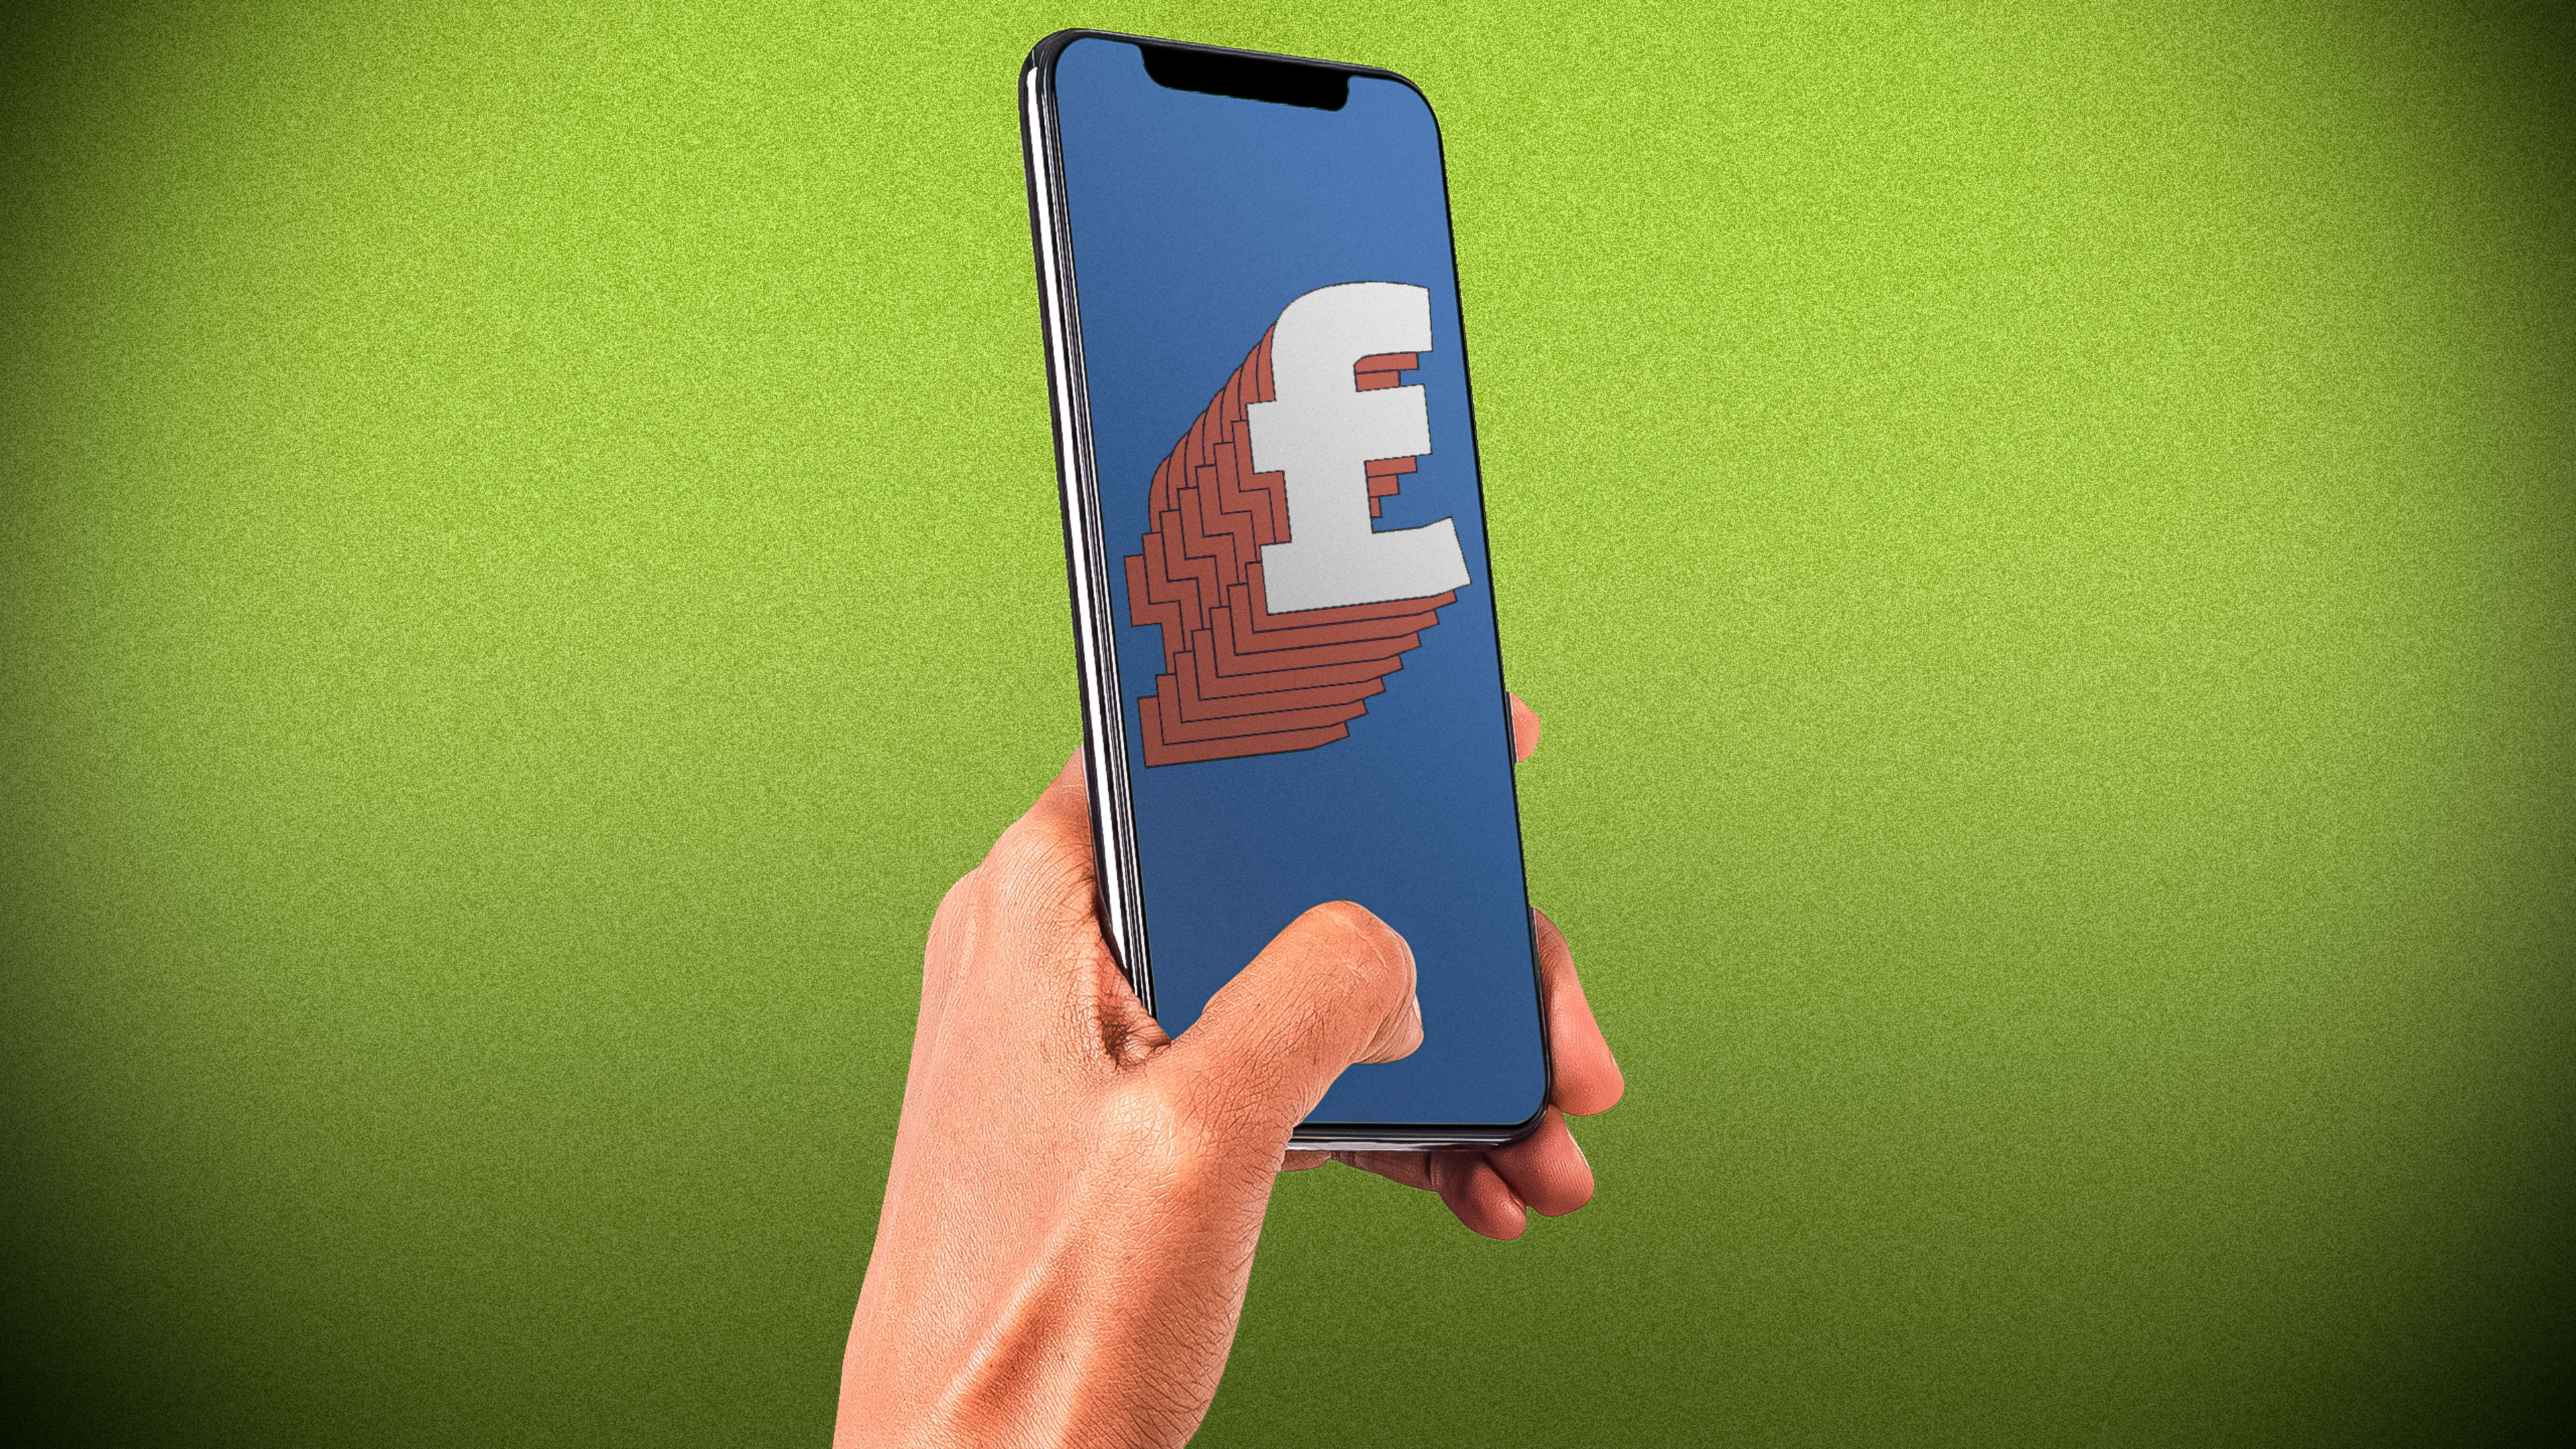 Meta’s plan to charge users for Facebook access is a big ‘FU’ to the EU